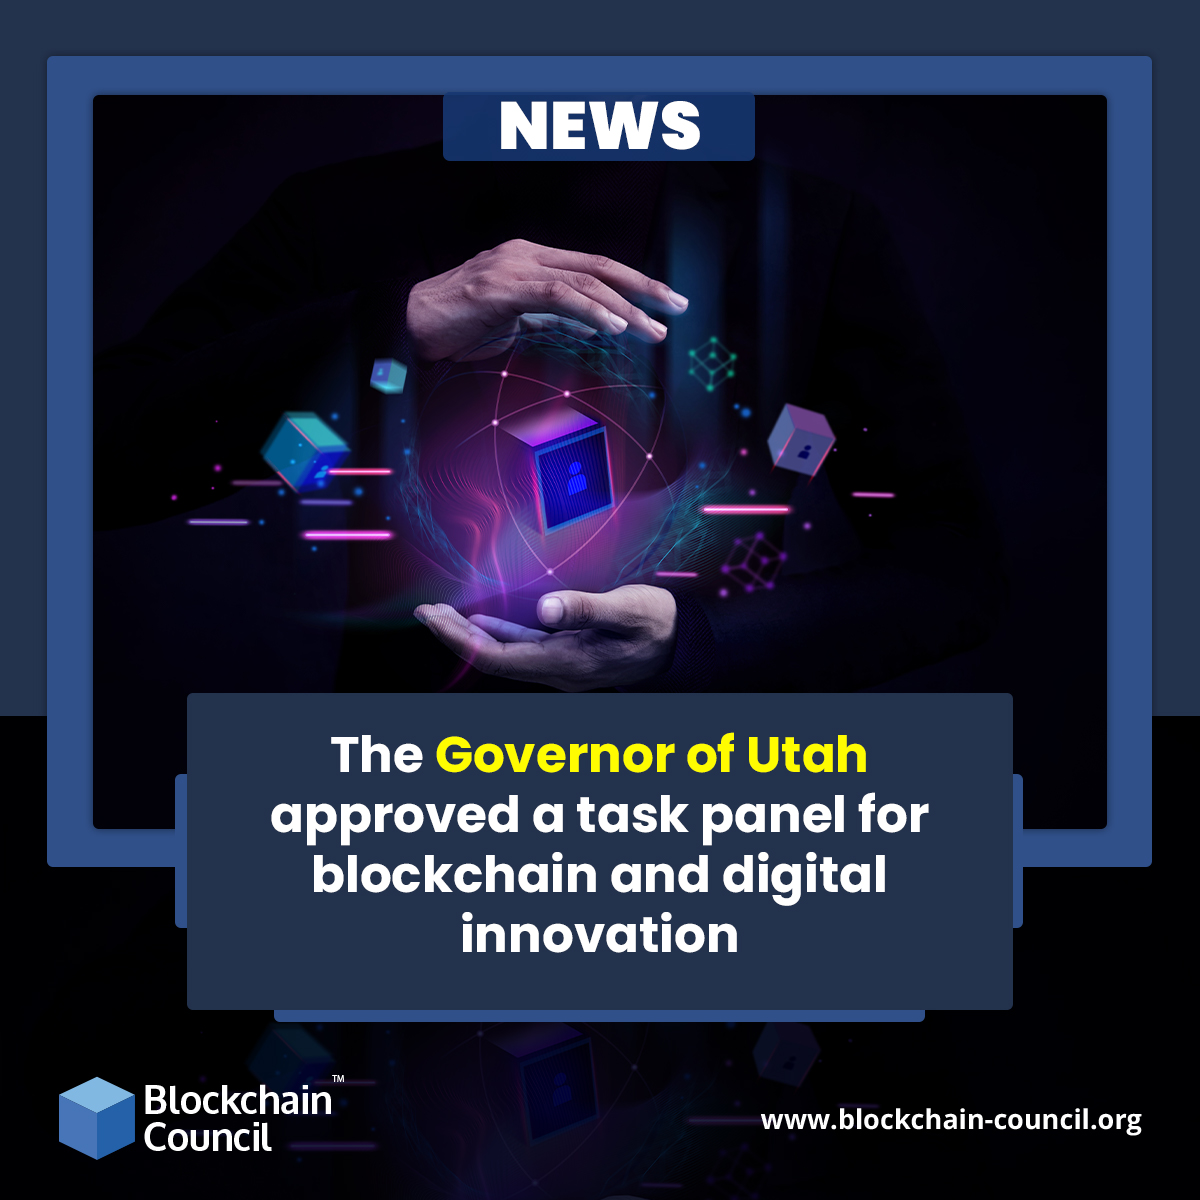 The Governor of Utah approved a task panel for blockchain and digital innovation